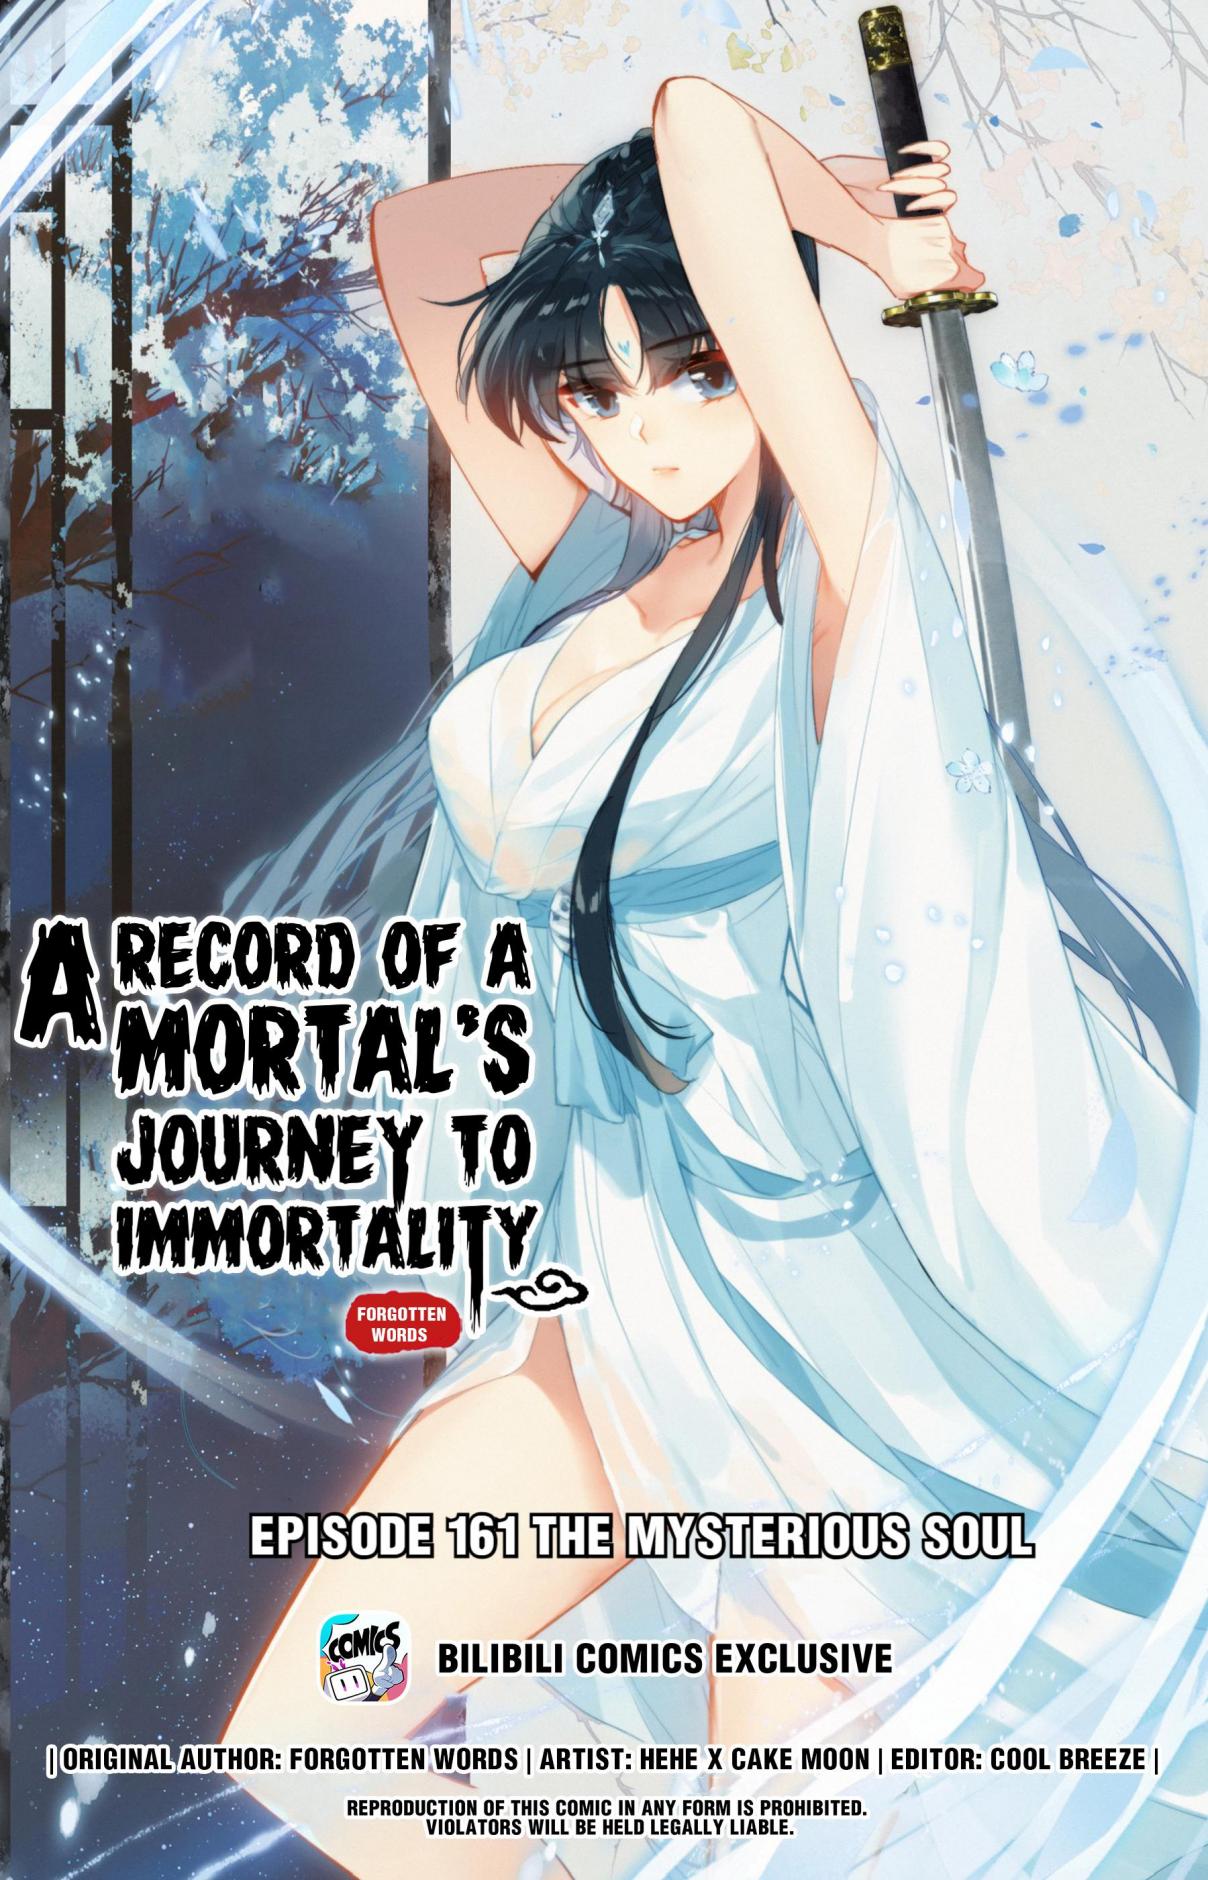 A Record of a Mortal's Journey to Immortality 161